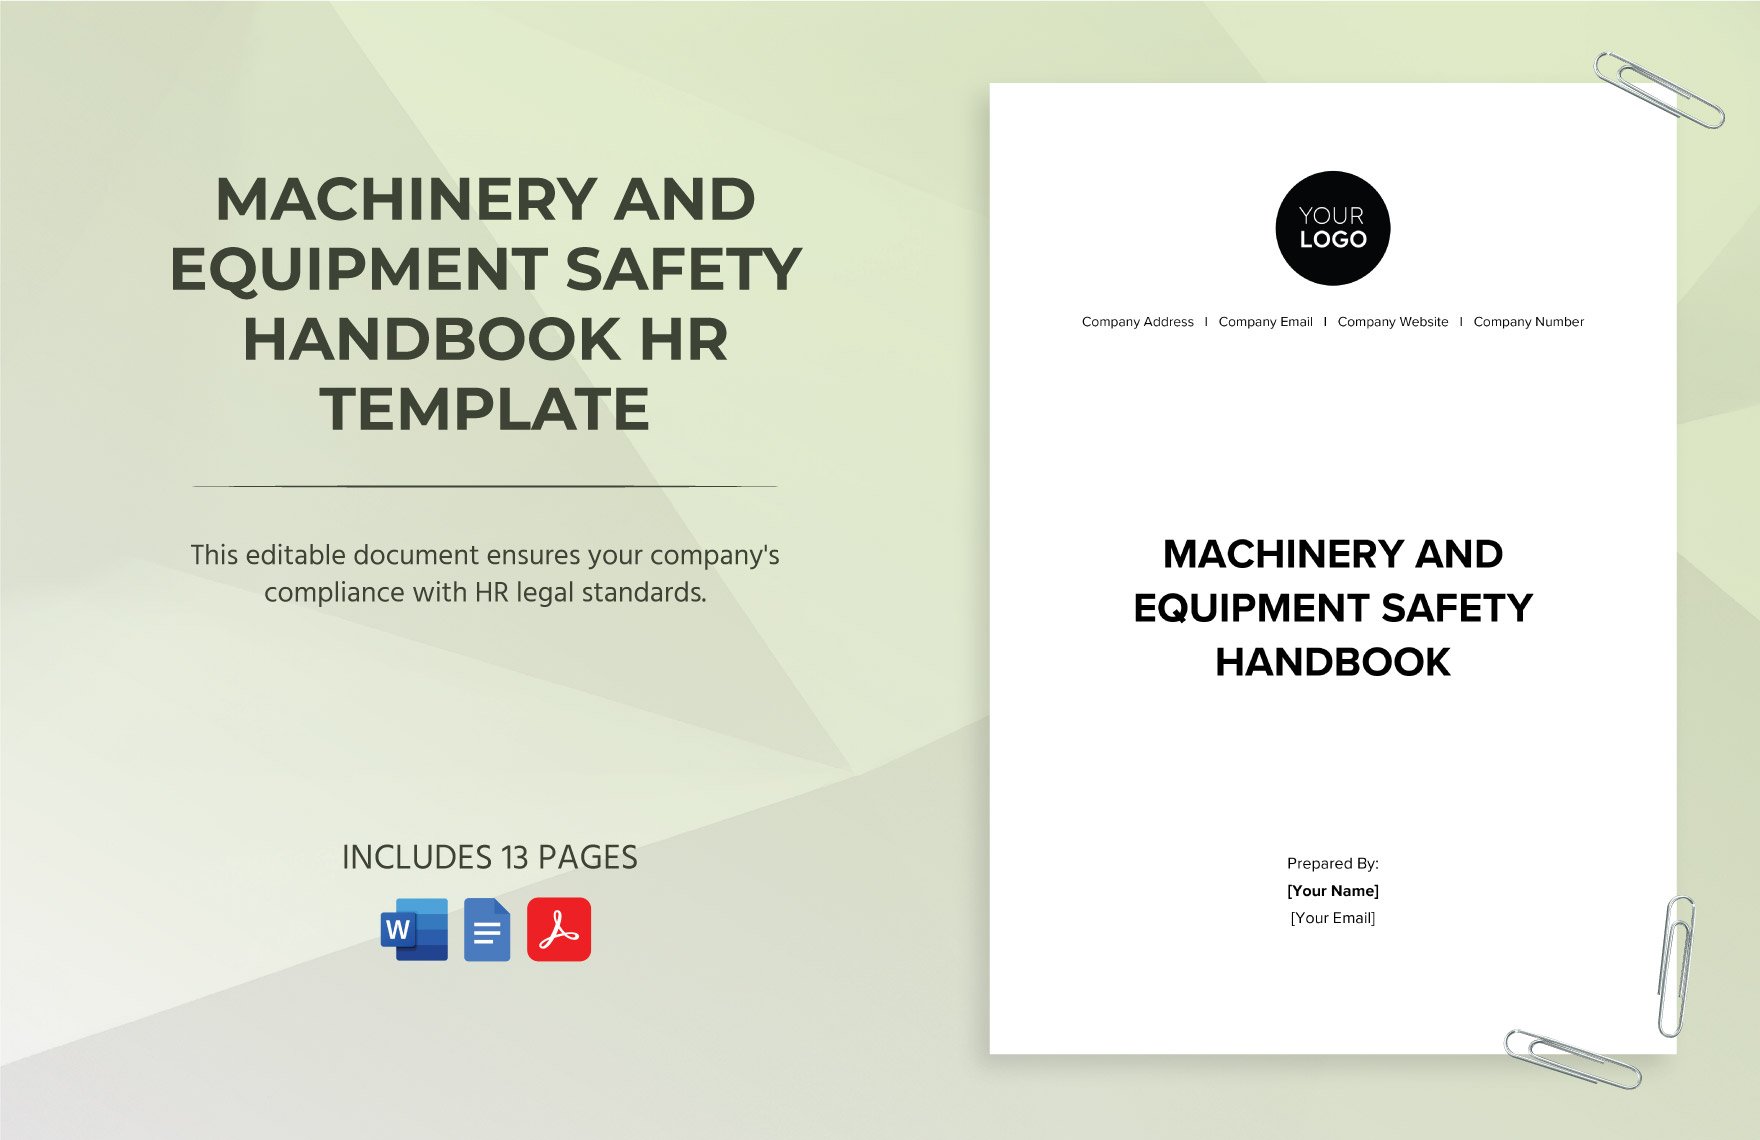 Machinery and Equipment Safety Handbook HR Template in Word, Google Docs, PDF